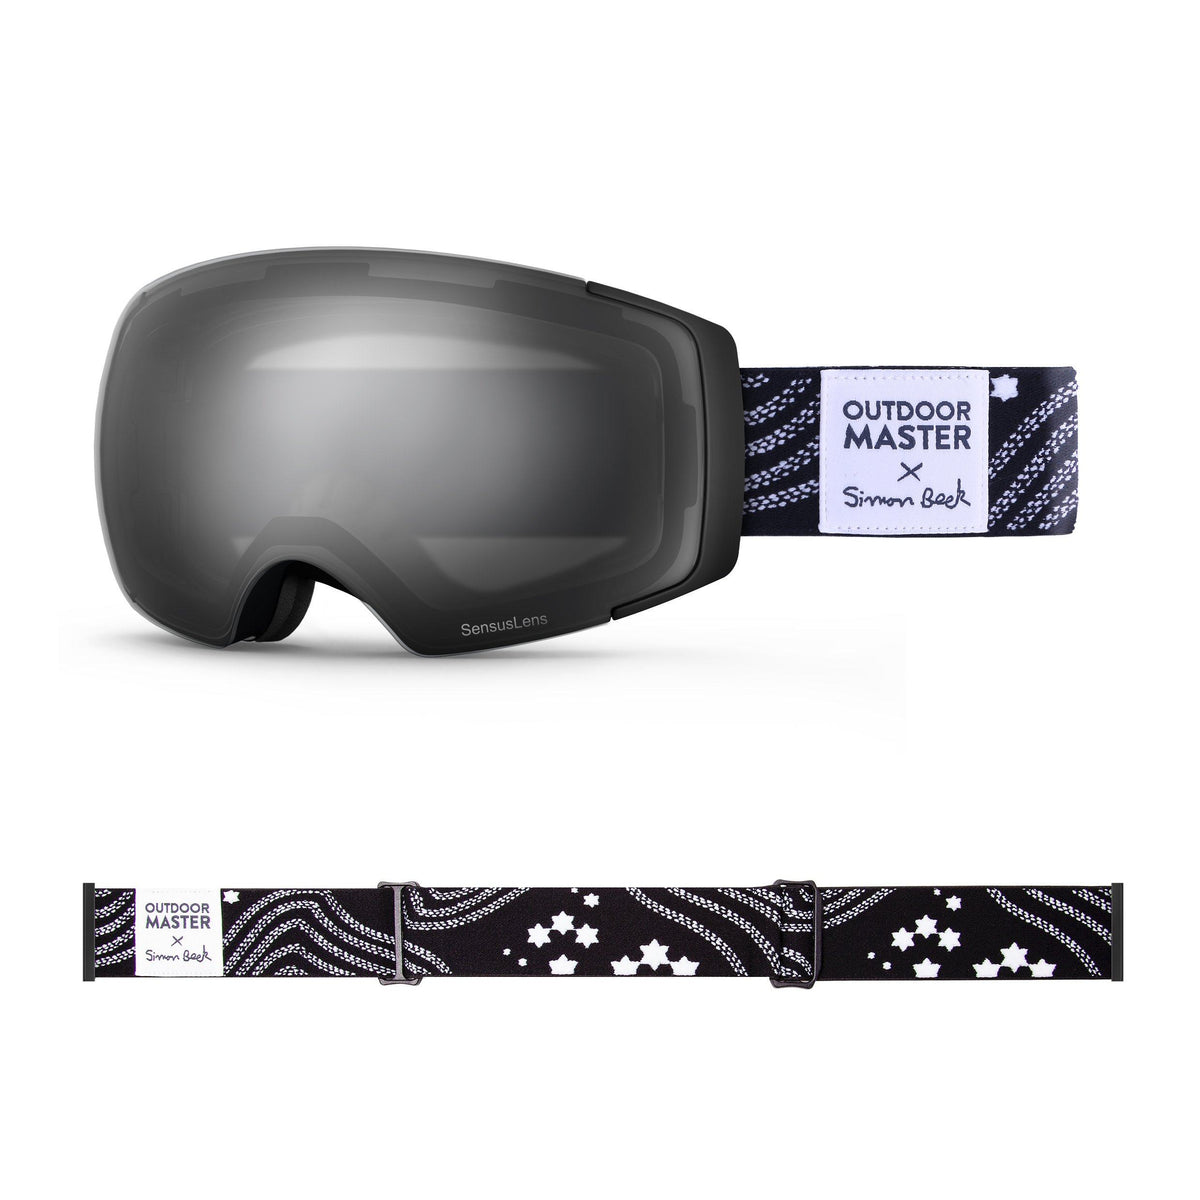 OutdoorMaster x Simon Beck Ski Goggles Pro Series - Snowshoeing Art Limited Edition OutdoorMaster GreenLens VLT 10% TAC Grey With REVO Silver Polarized Star Road-Black